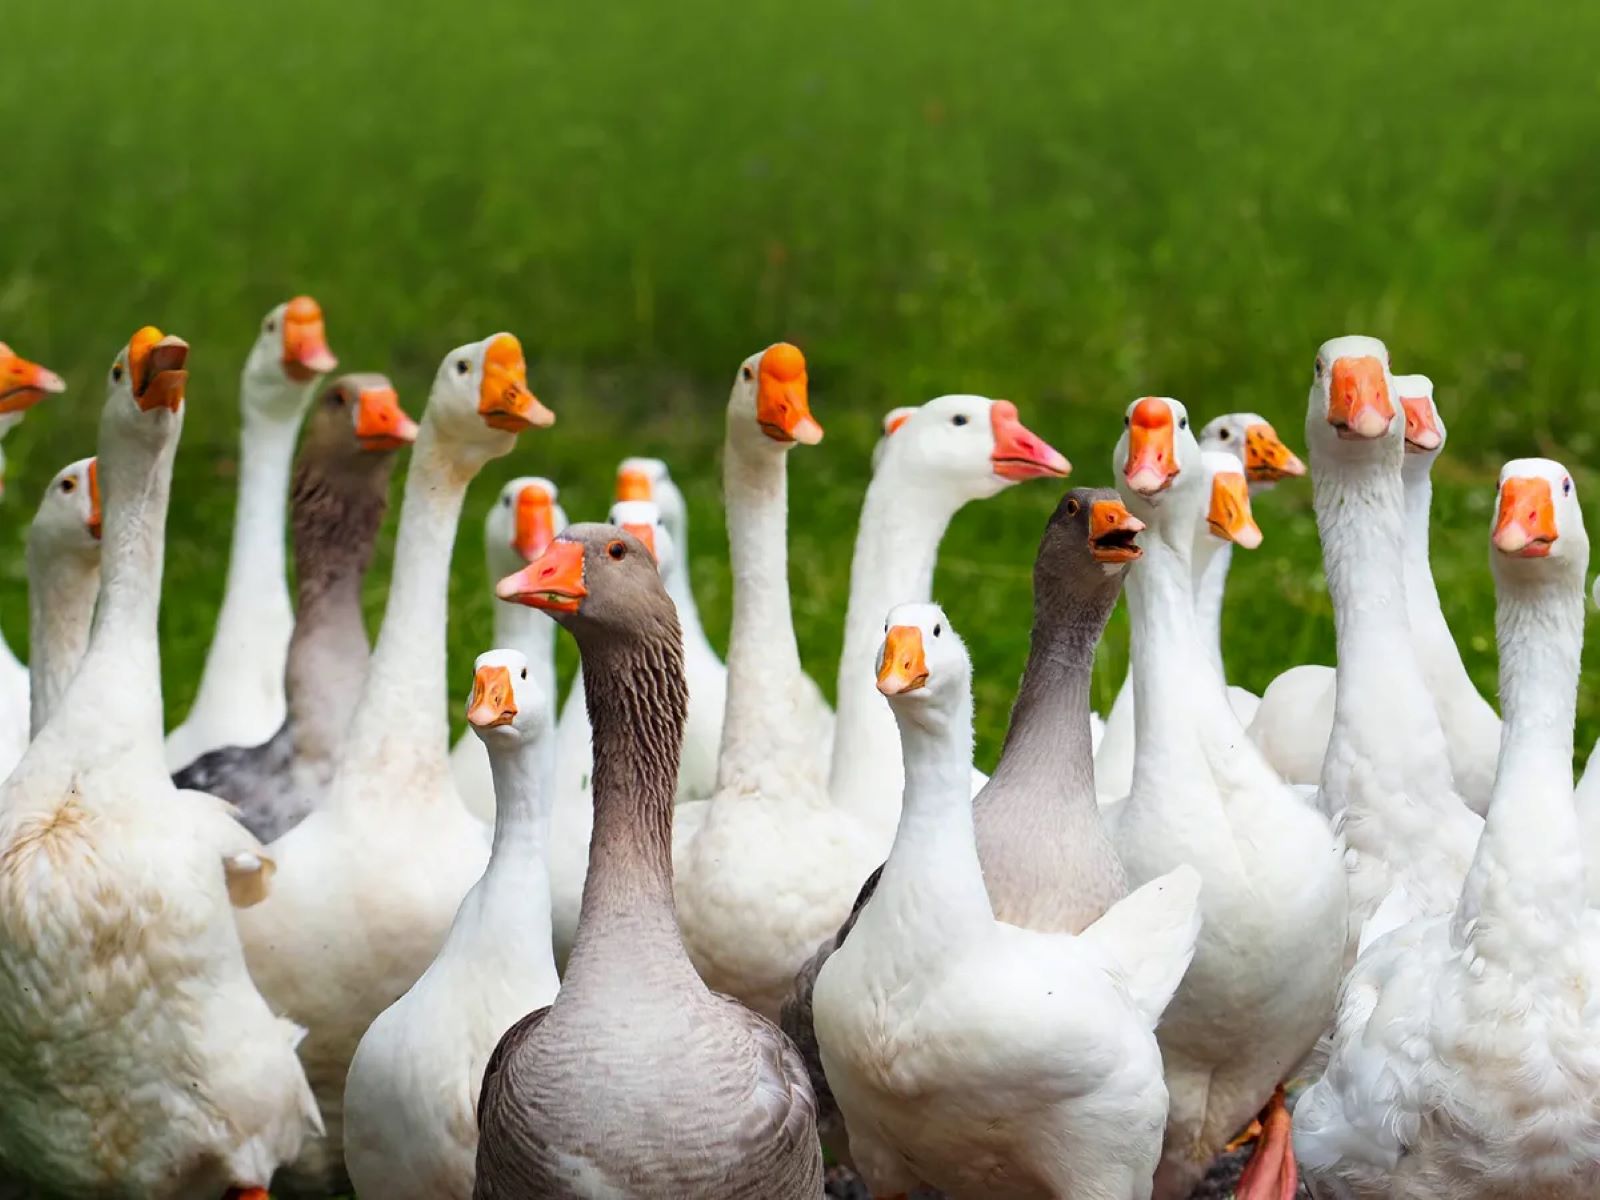 'Gooses' Is Incorrect. The Correct Plural Form Of 'goose' Is 'geese'.